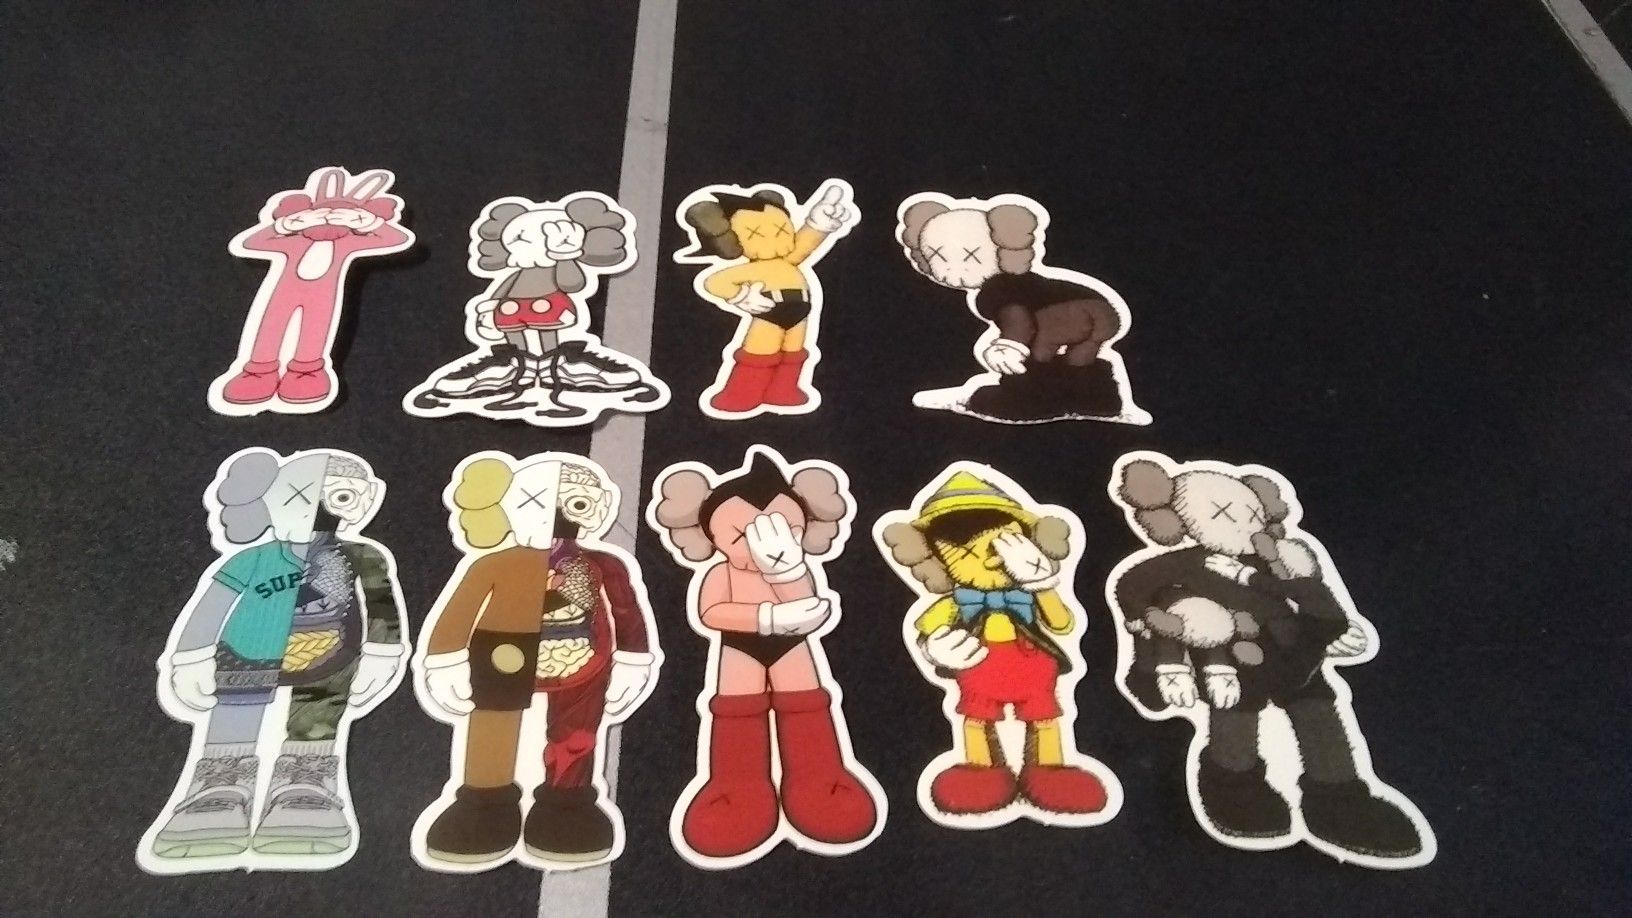 Kaws stickers for Sale in San Jose, CA - OfferUp